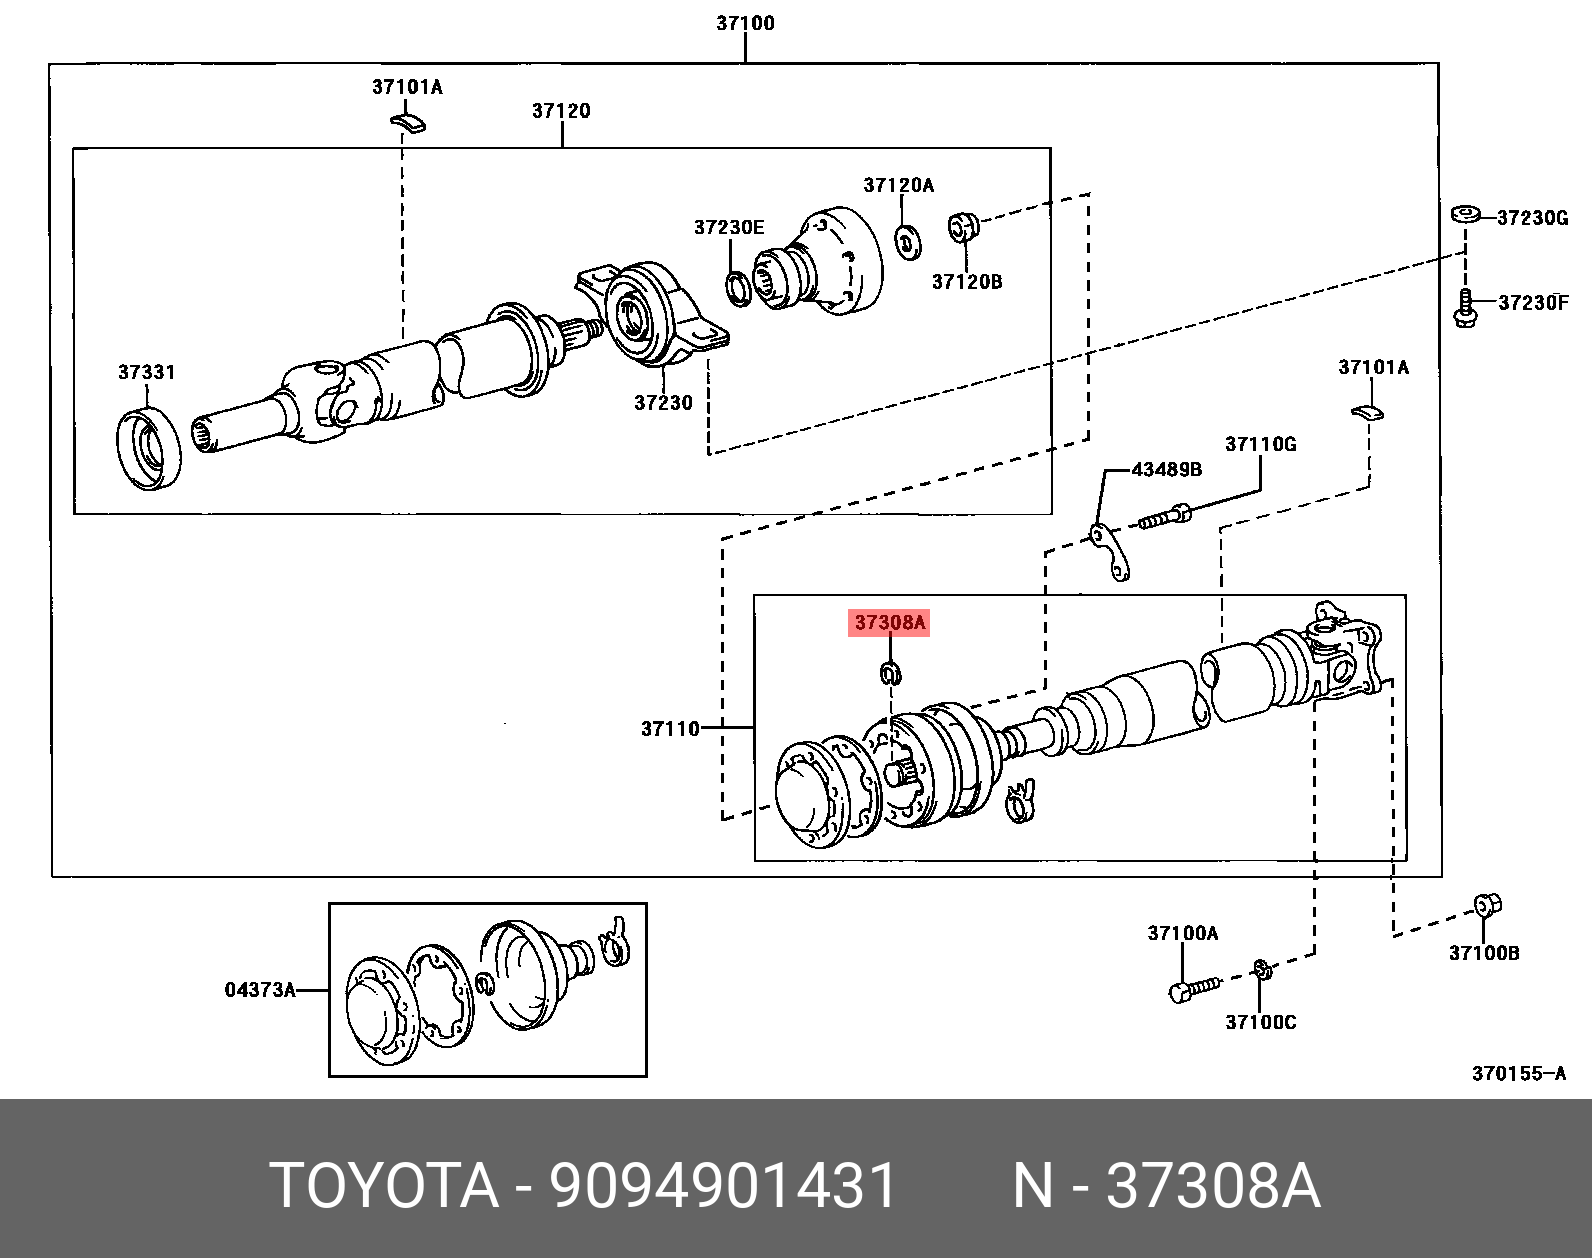 ESTIMA T/L 199912 - 200601, CLAMP (FOR UNIVERSAL JOINT COVER)